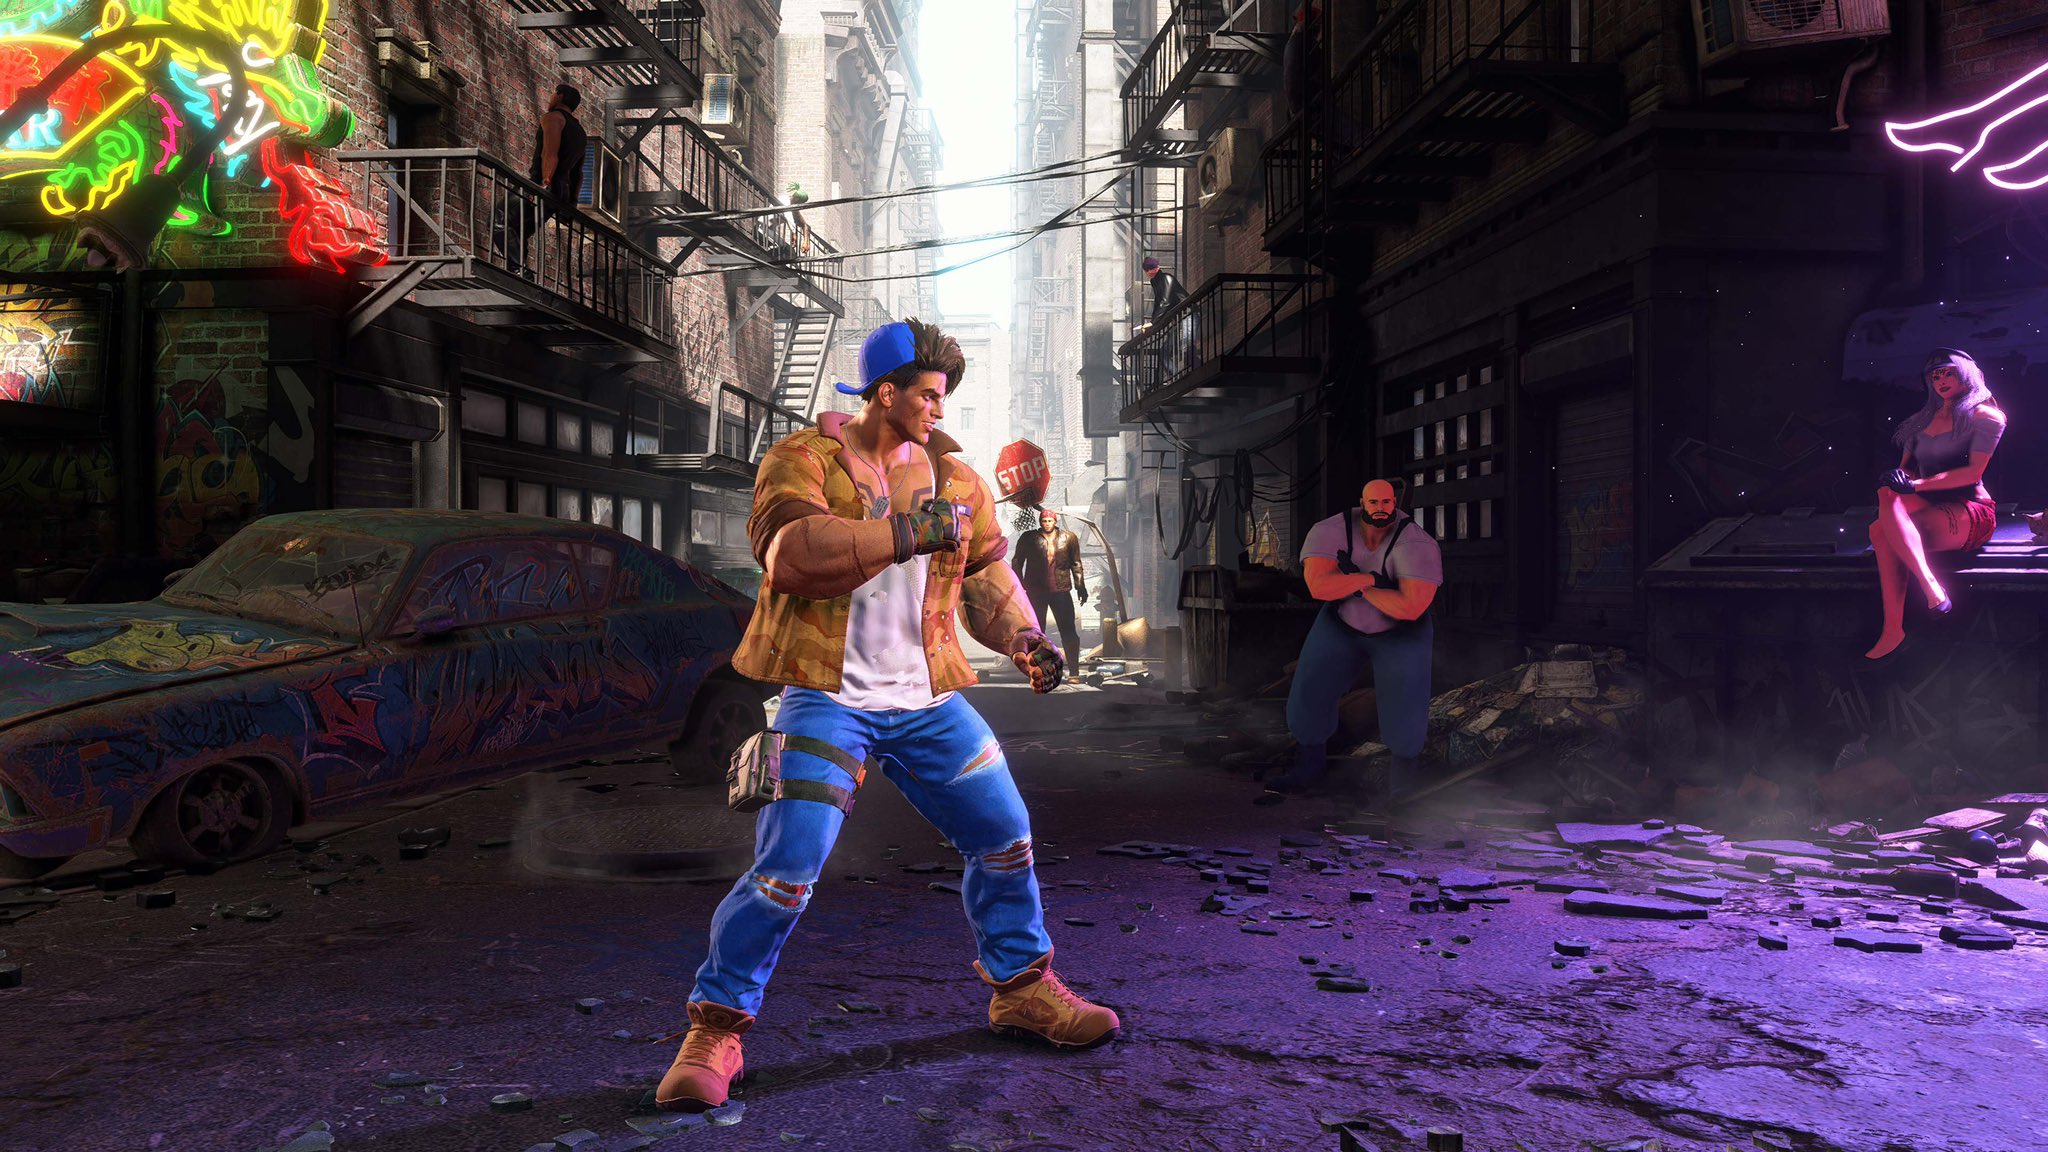 Street Fighter 6 Reveals Classic Costumes